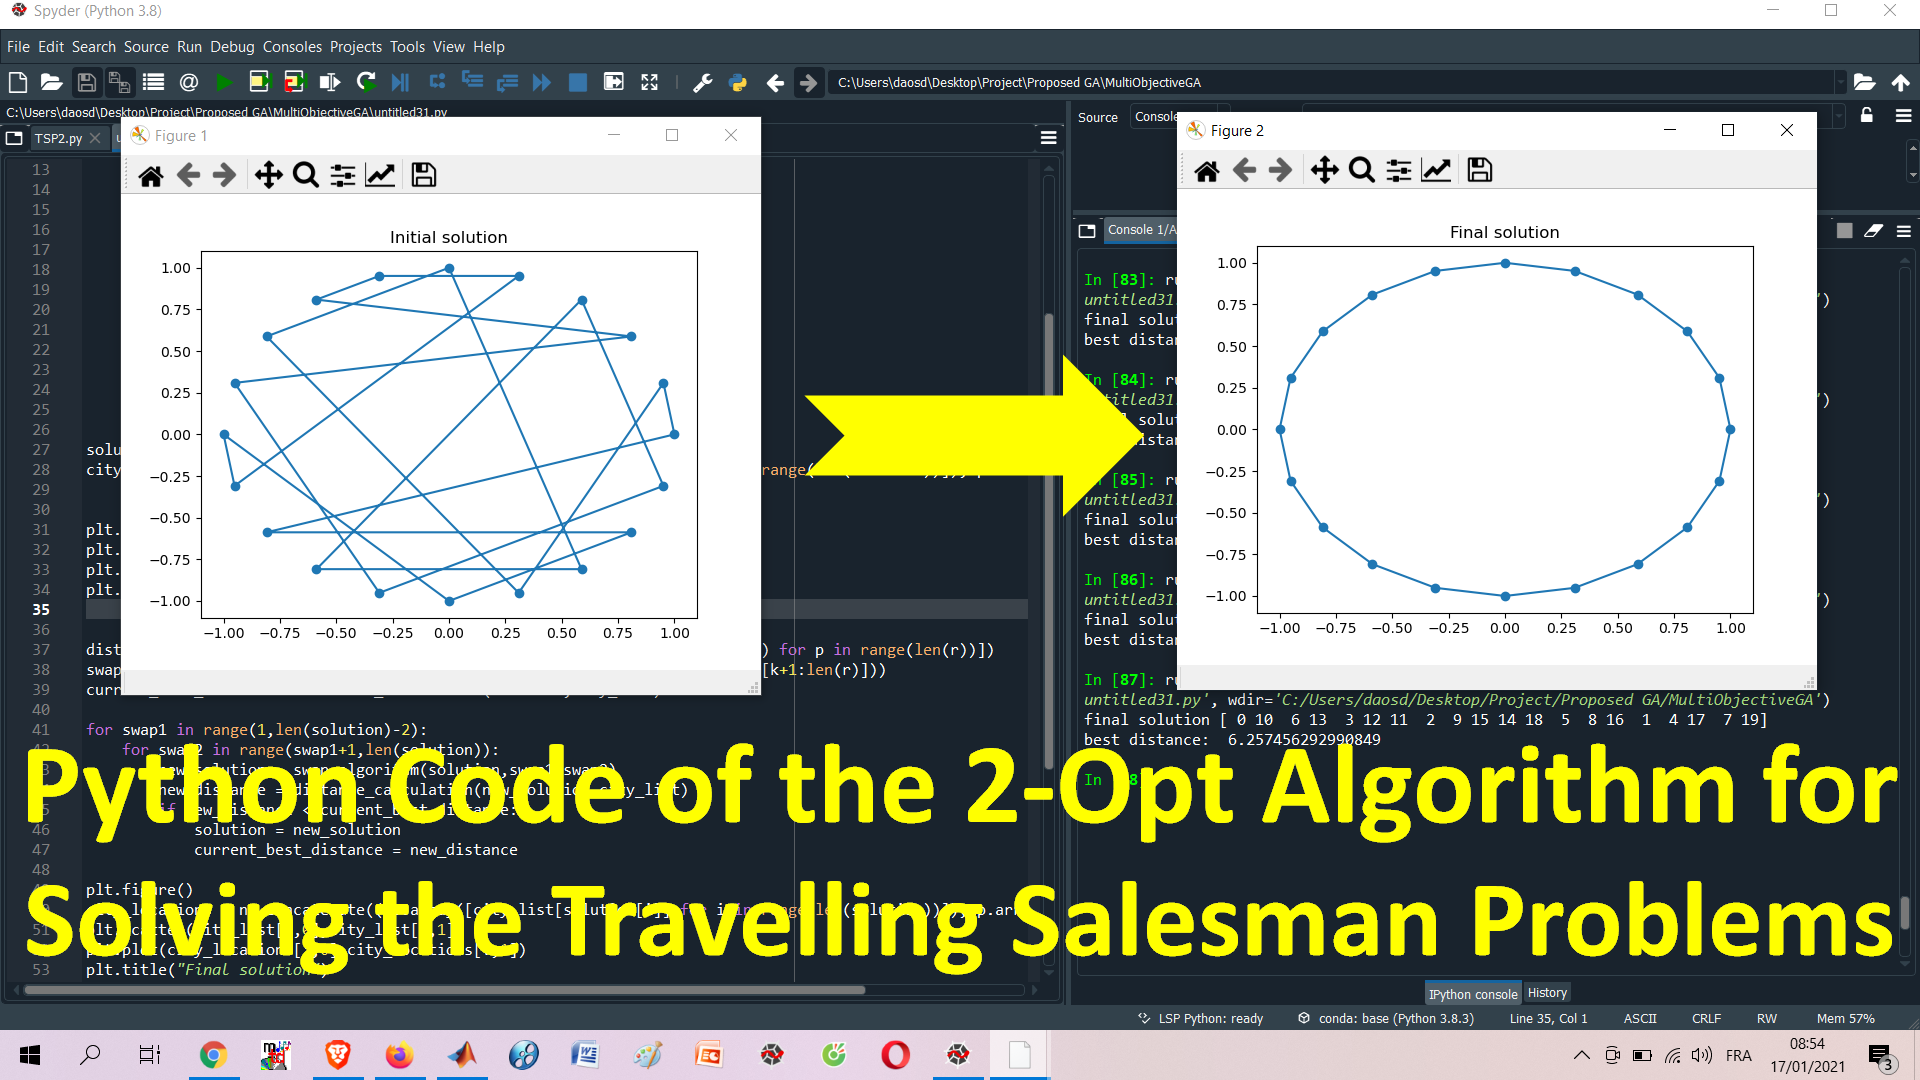 Python Code of the 2-Opt Algorithm for Solving the Traveling Salesman Problems